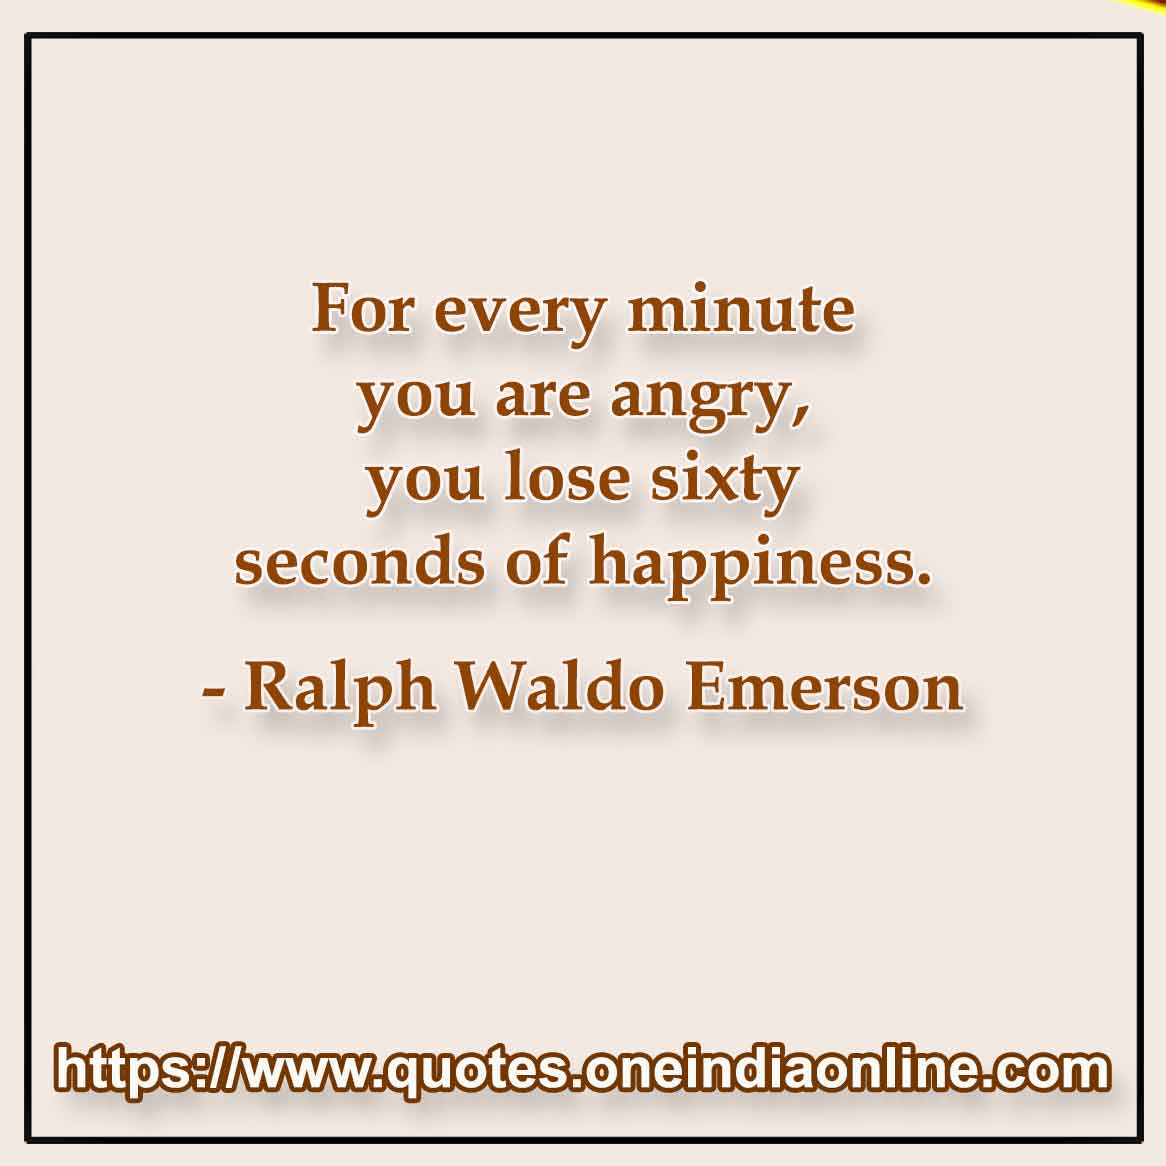 For every minute you are angry, you lose sixty seconds of happiness.

- Famous Happy Quotes by Ralph Waldo Emerson